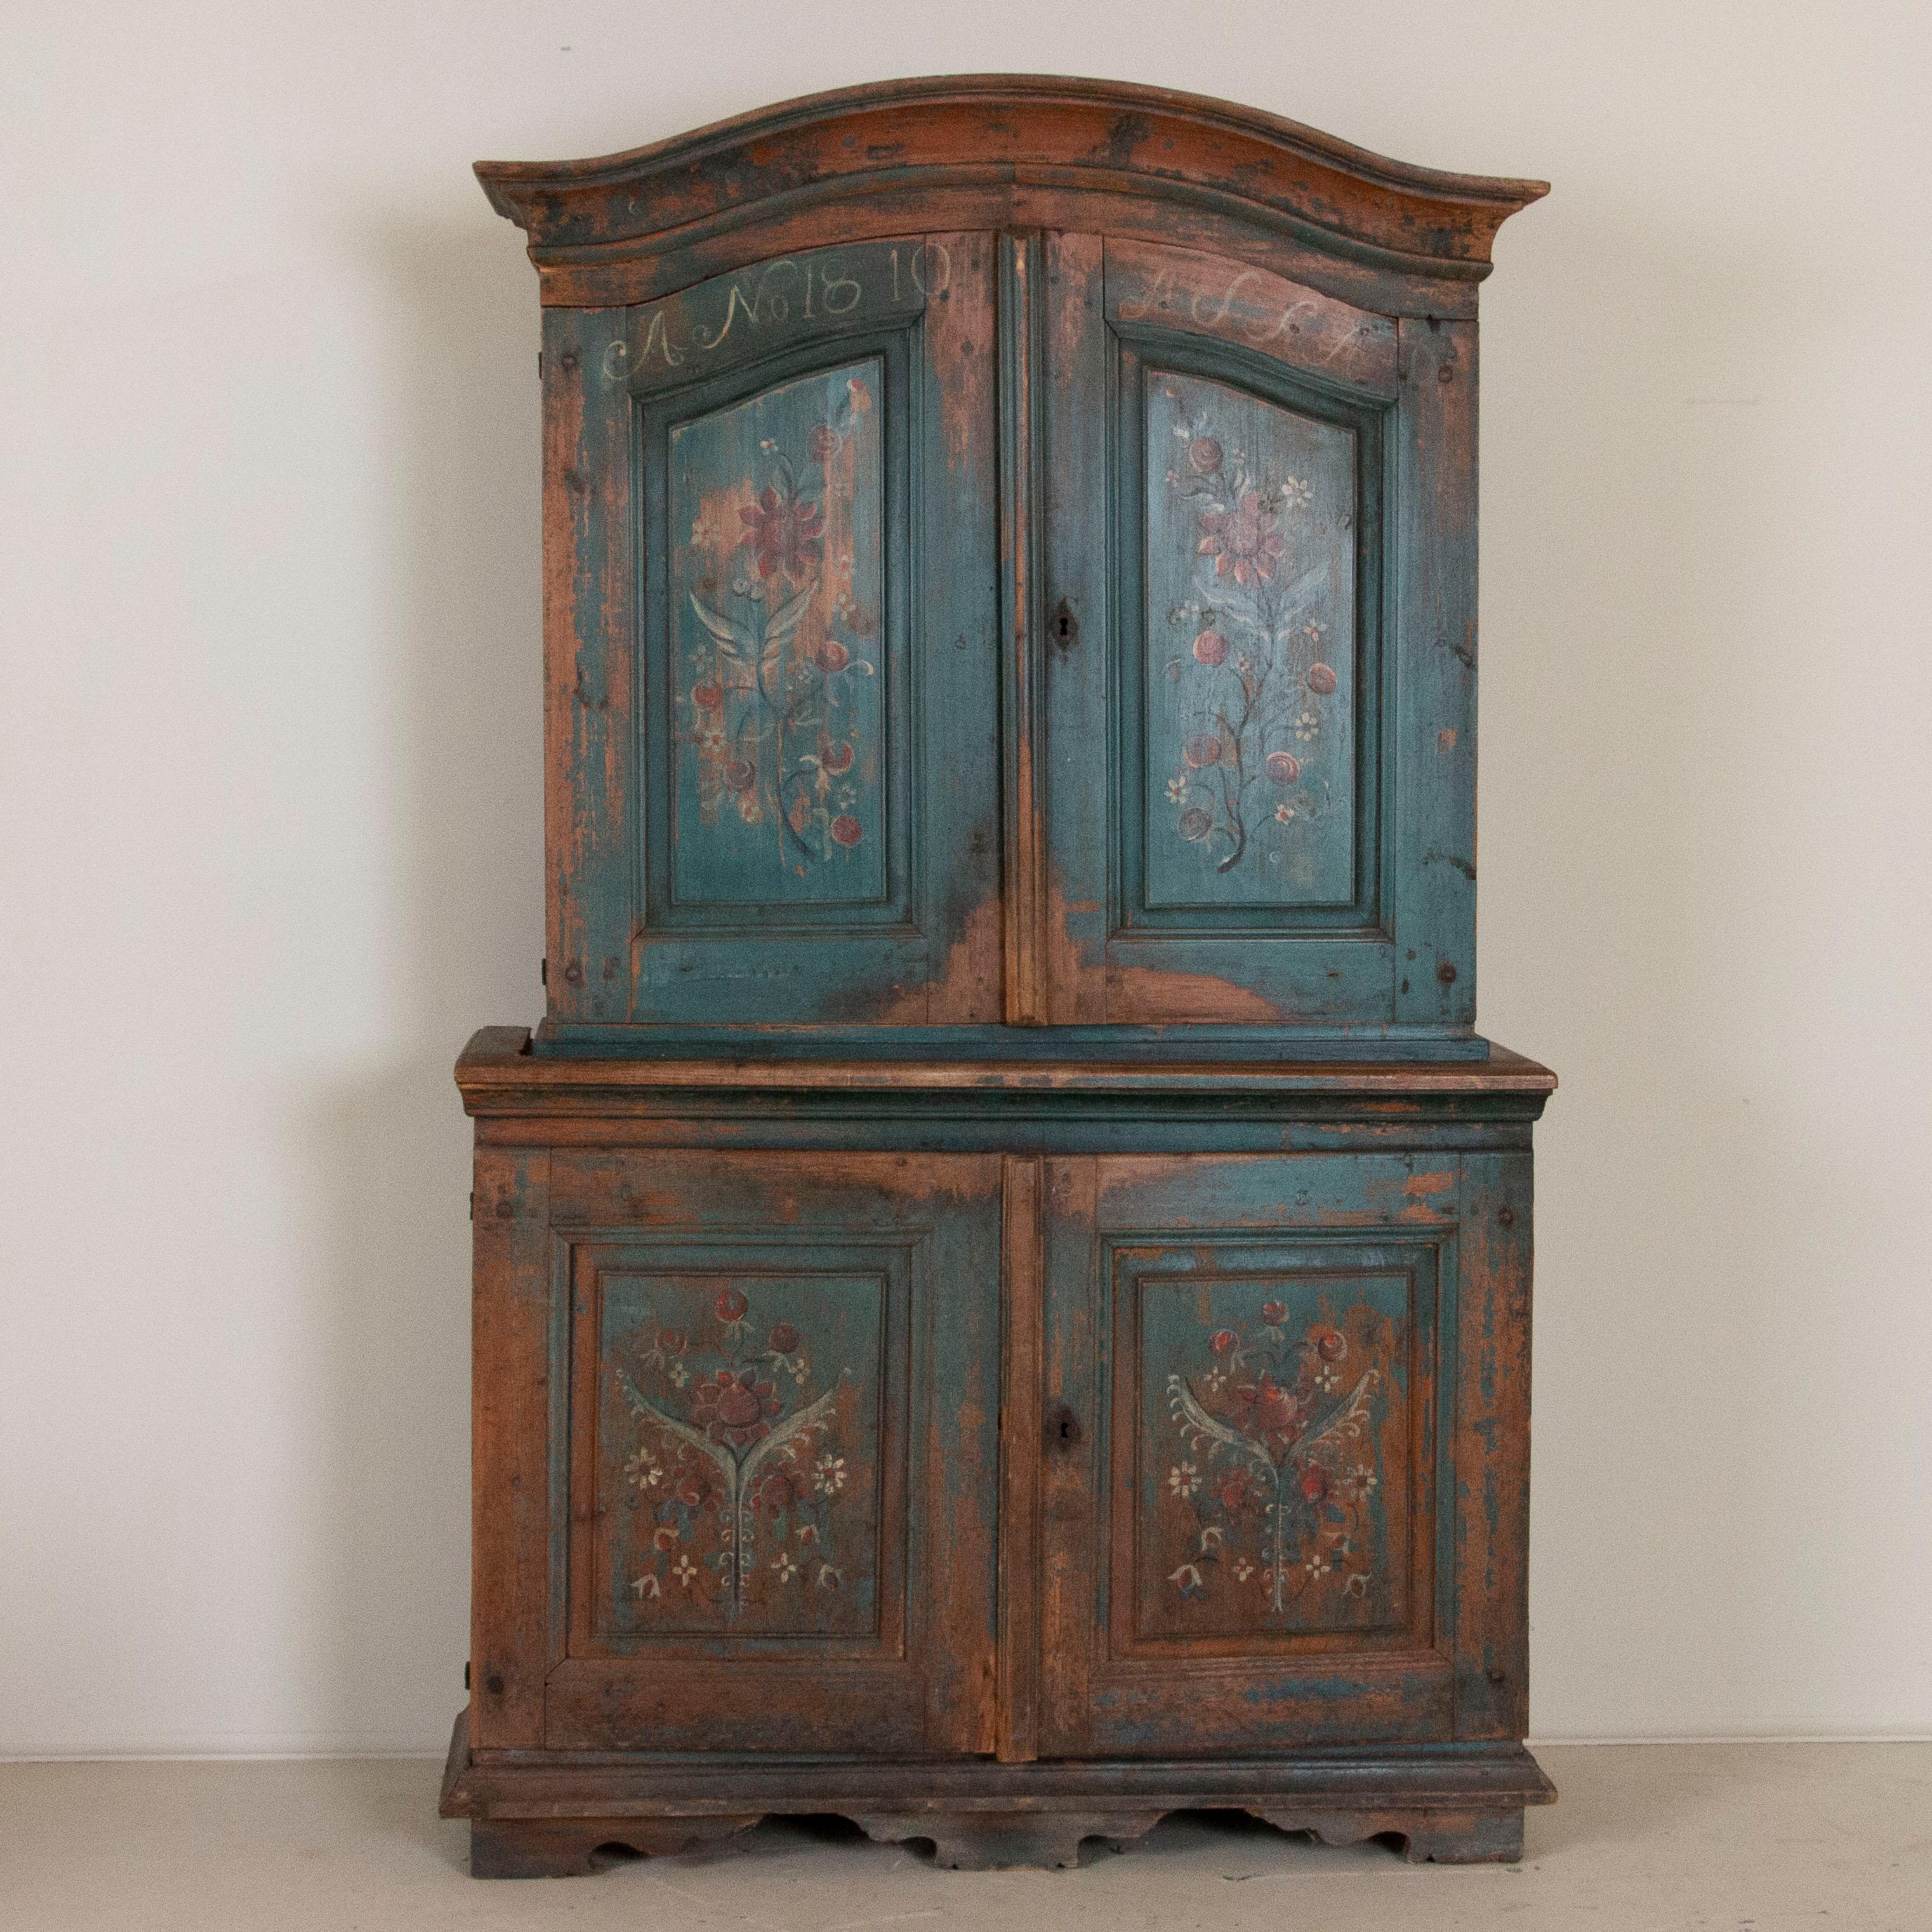 For those that appreciate the lovely hues of hand painted antiques from the Swedish countryside, this original blue painted cabinet is a special find. 
It has aged gently over the years, resulting in a softly distressed patina than only comes from